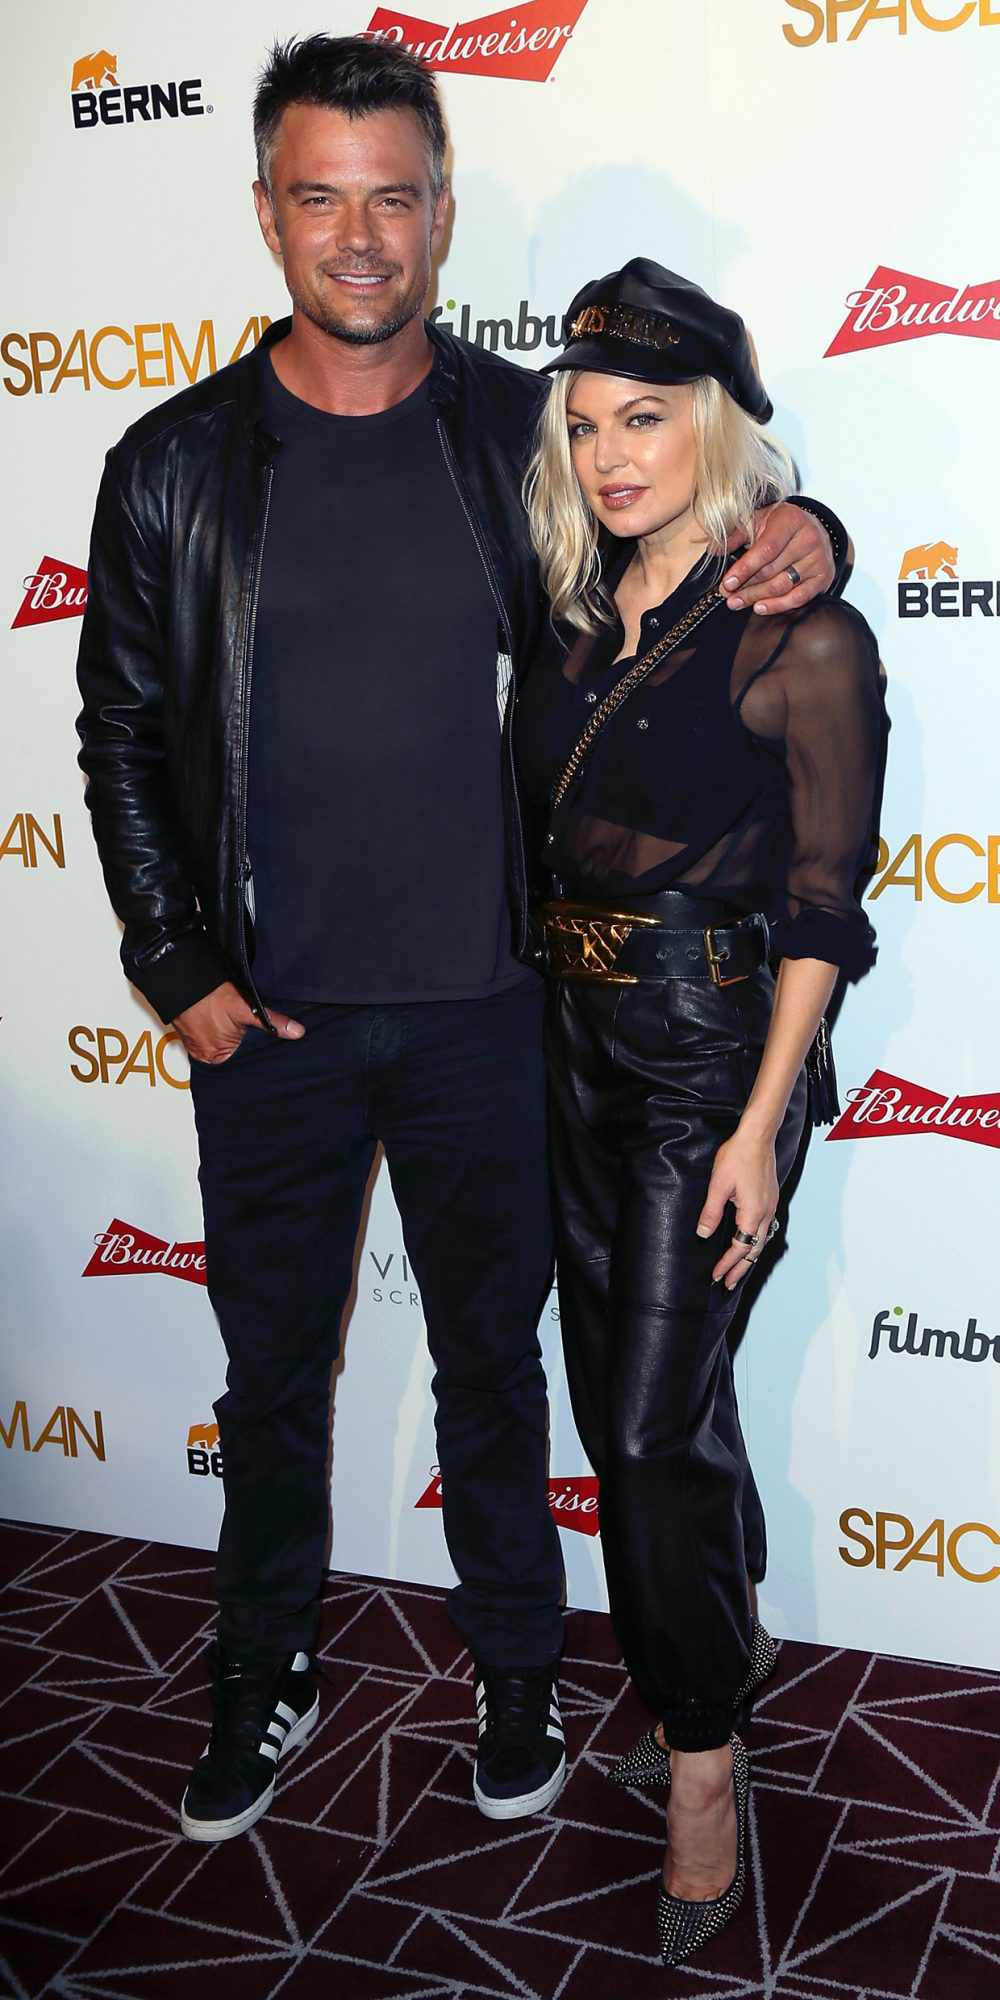 WEST HOLLYWOOD, CA - AUGUST 07:  Actor Josh Duhamel and wife singer Fergie attend the premiere of Orion Pictures' "Spaceman" at The London Hotel on August 7, 2016 in West Hollywood, California.  (Photo by David Livingston/Getty Images)